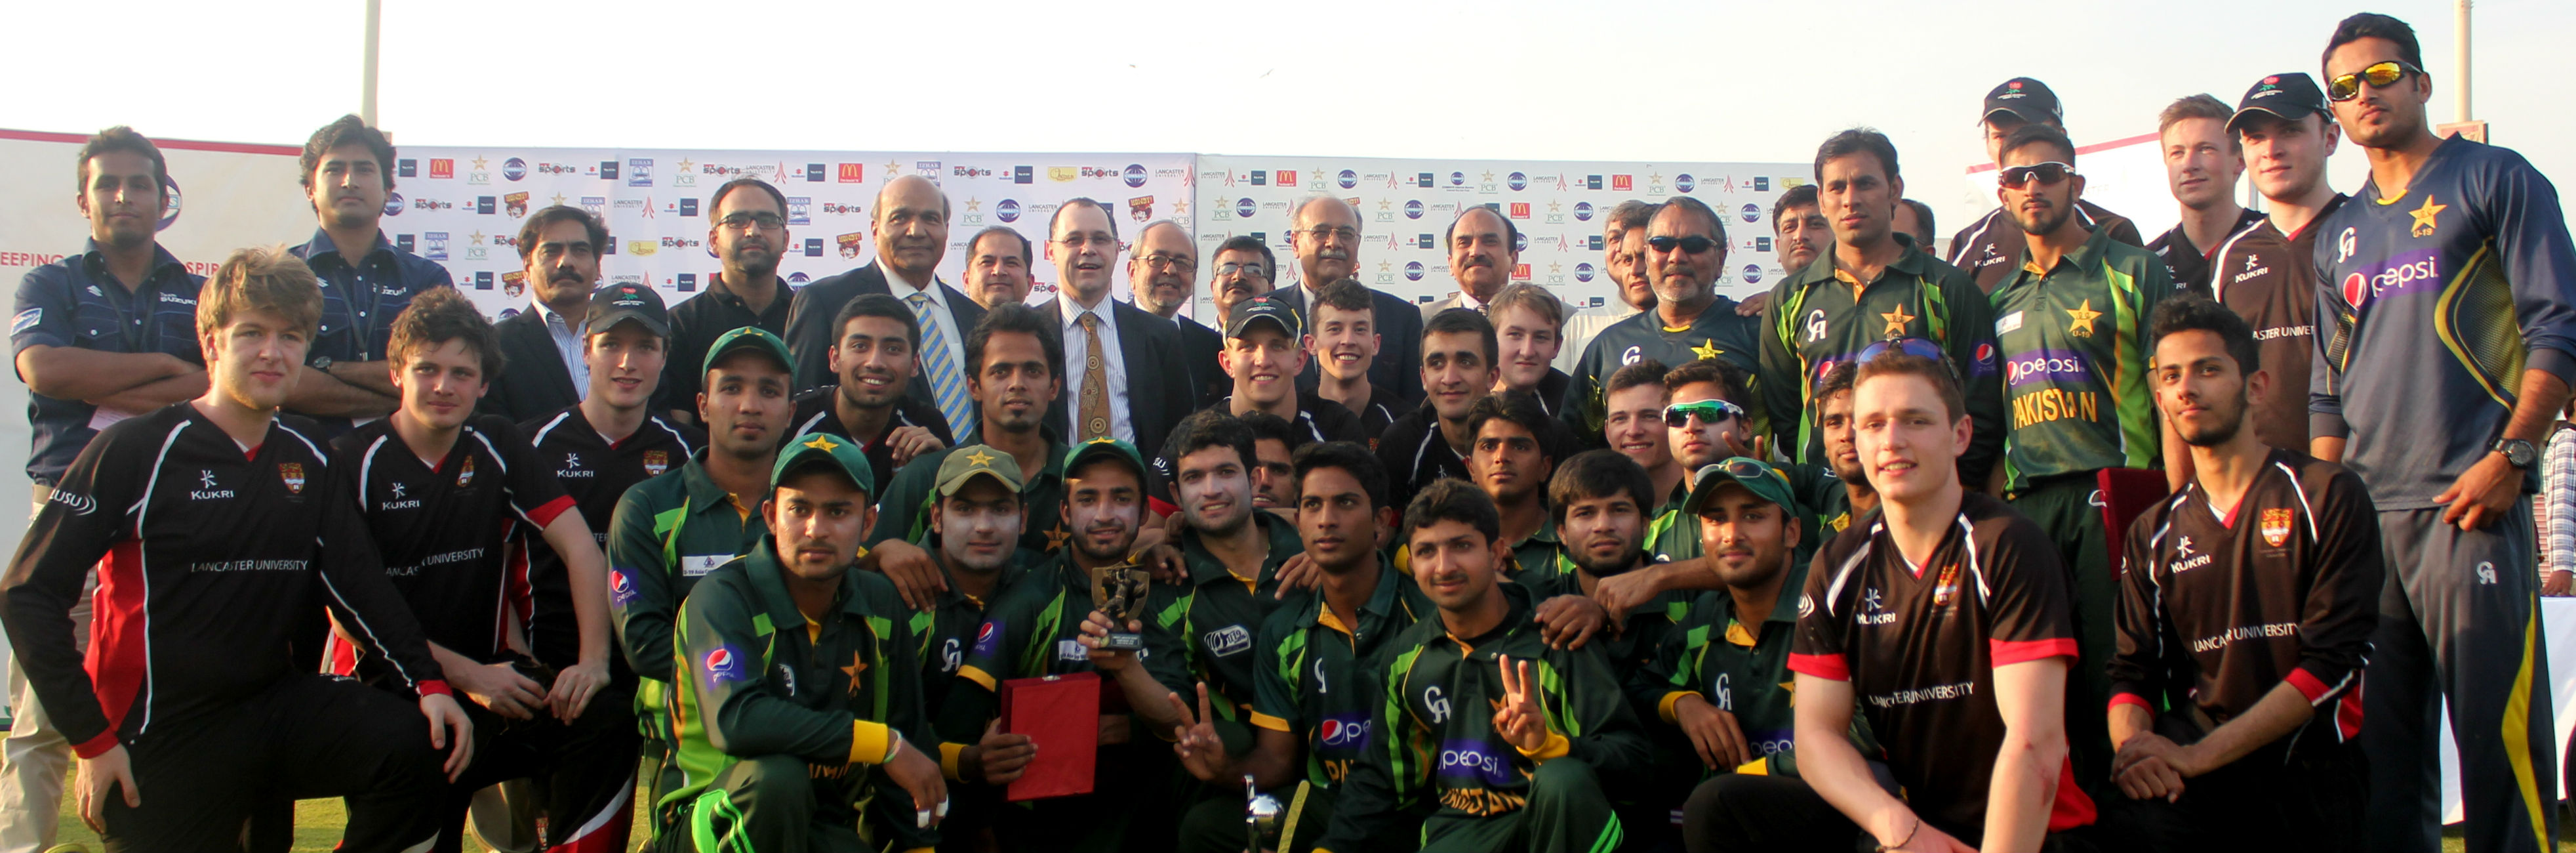 Both teams with members of the Pakistan Cricket Board, COMSATS Institute of Information Technology Directors and the Vice Chancellor of Lancaster University Professor Mark E. Smith